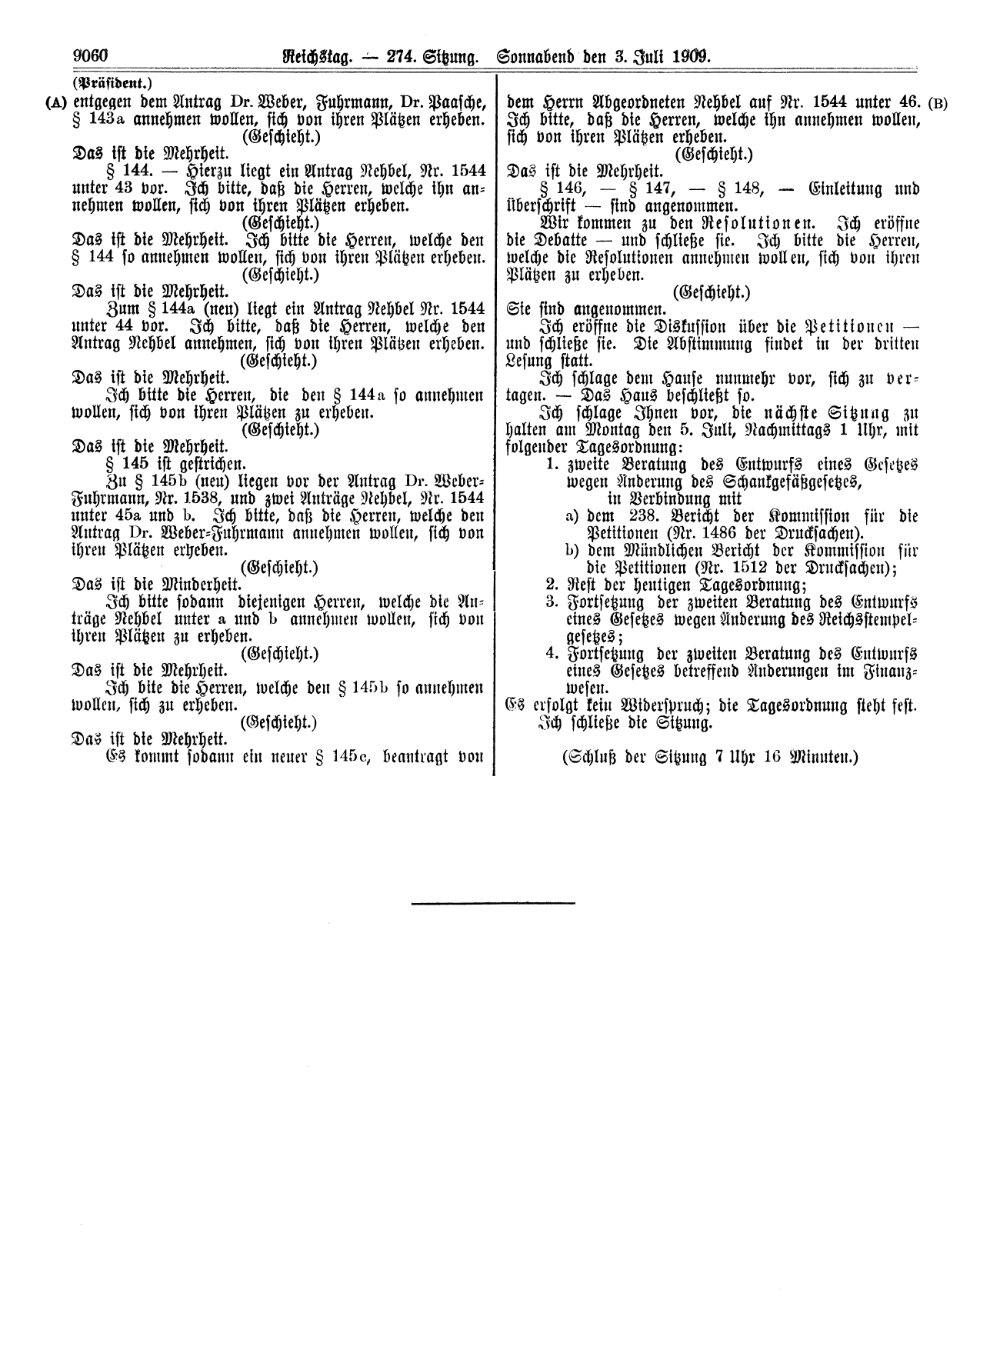 Scan of page 9060